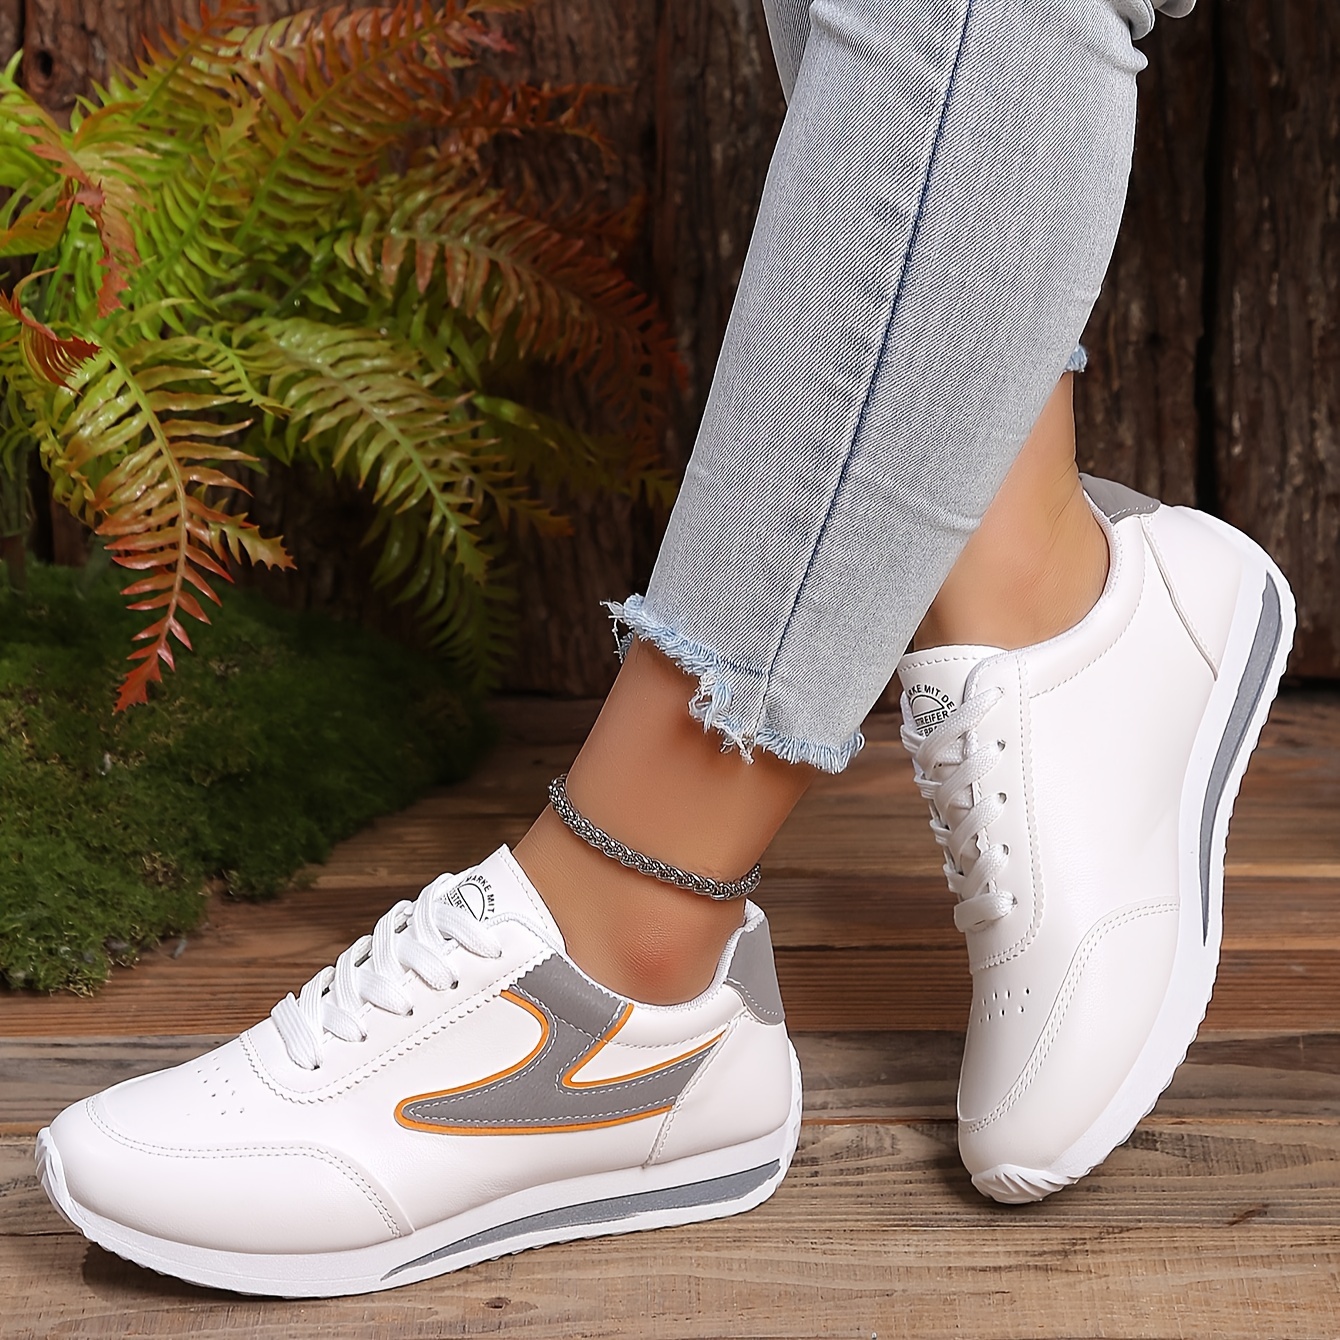 simple flat sneakers women s casual lace outdoor shoes details 3